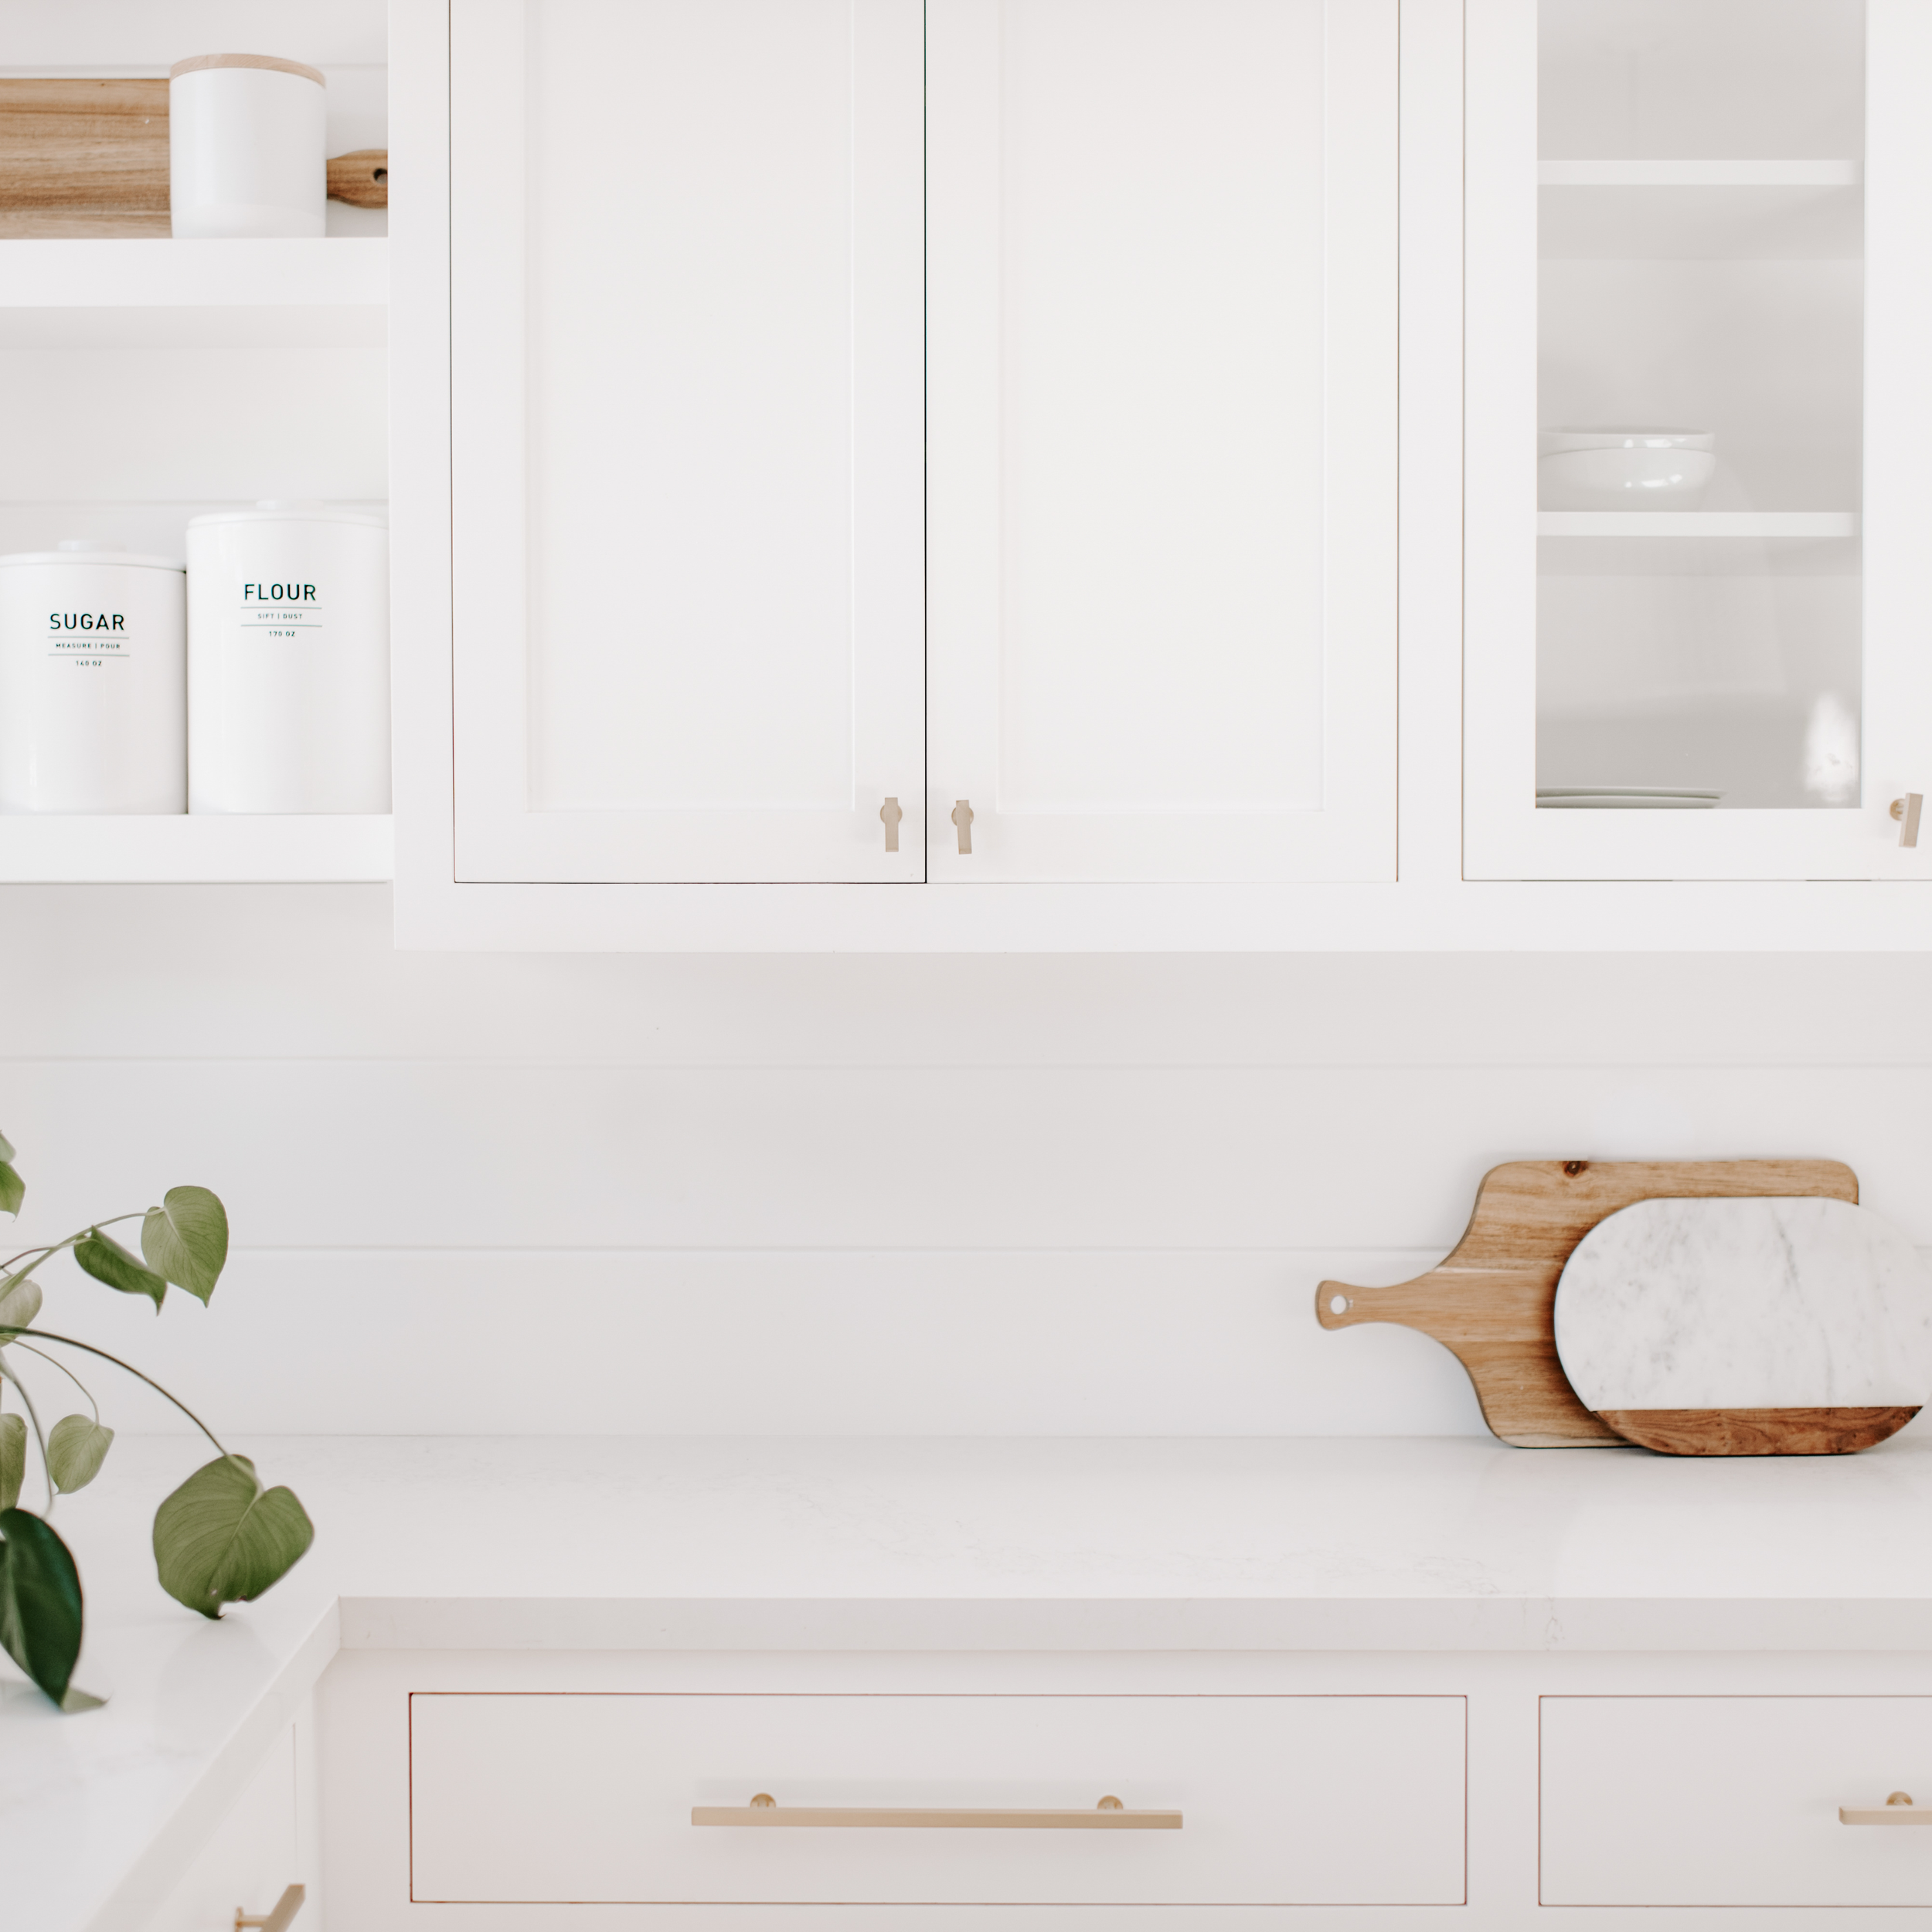 products — Tidy Tips from Professional Organizers — Tidy Nest